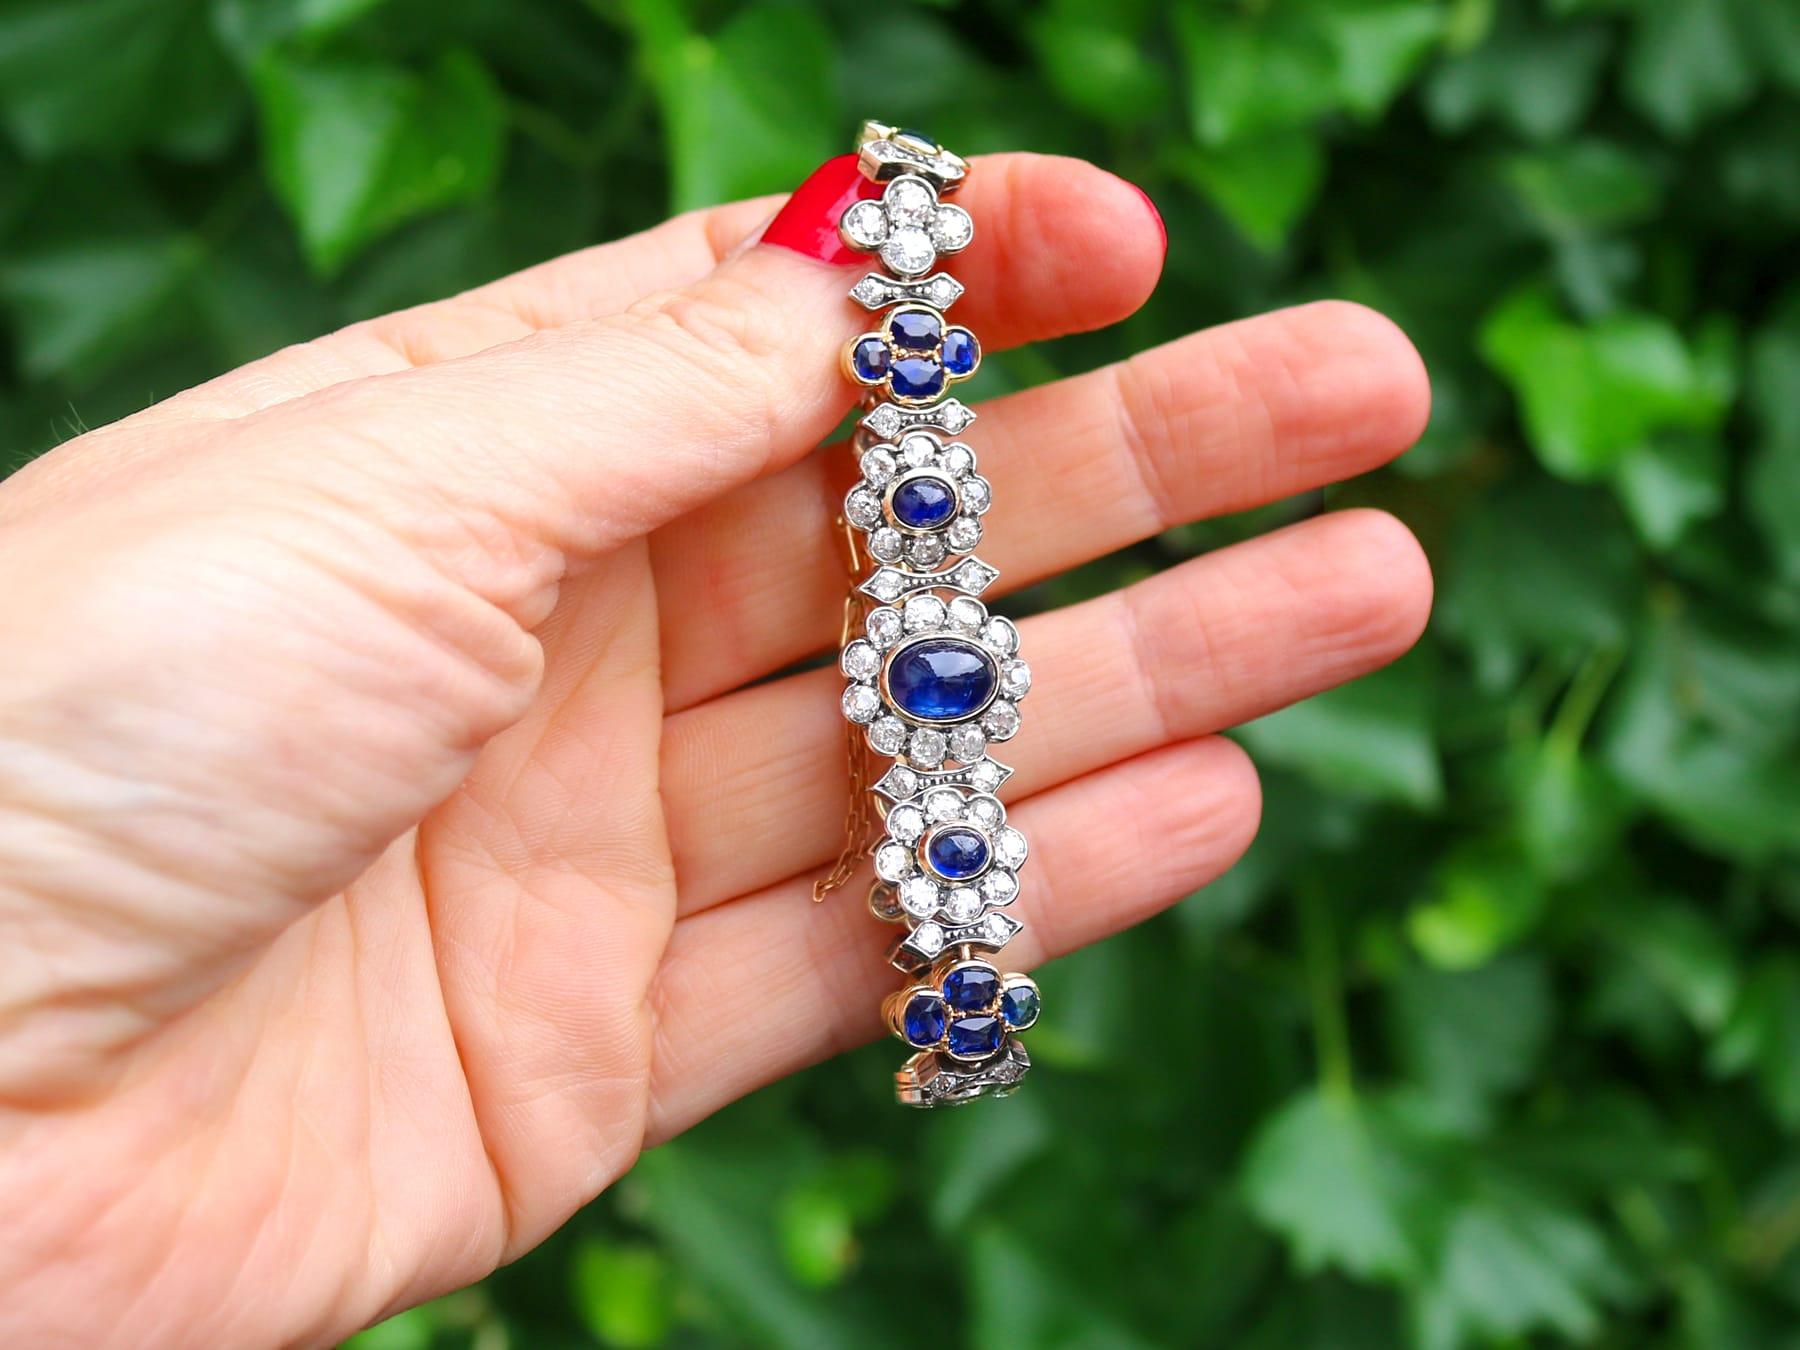 A stunning antique French 6.72 carat sapphire and 7.15 carat diamond, 18 karat yellow gold and silver set bracelet; part of our diverse antique jewelry and estate jewelry collections.

This stunning, fine and impressive antique cabochon cut sapphire